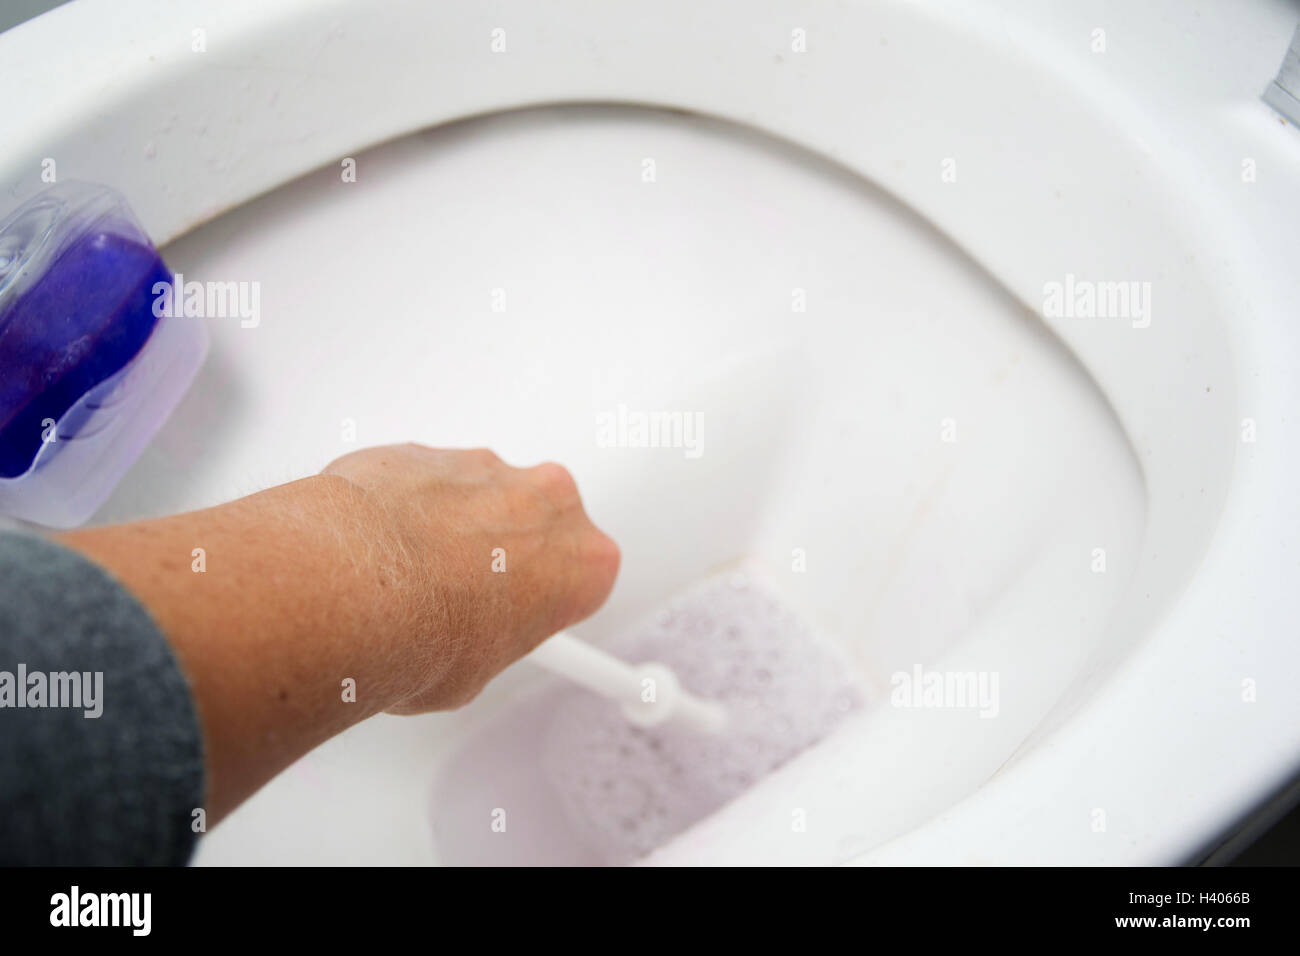 A woman cleans a bathroom toilet with a scrub brush Stock Photo